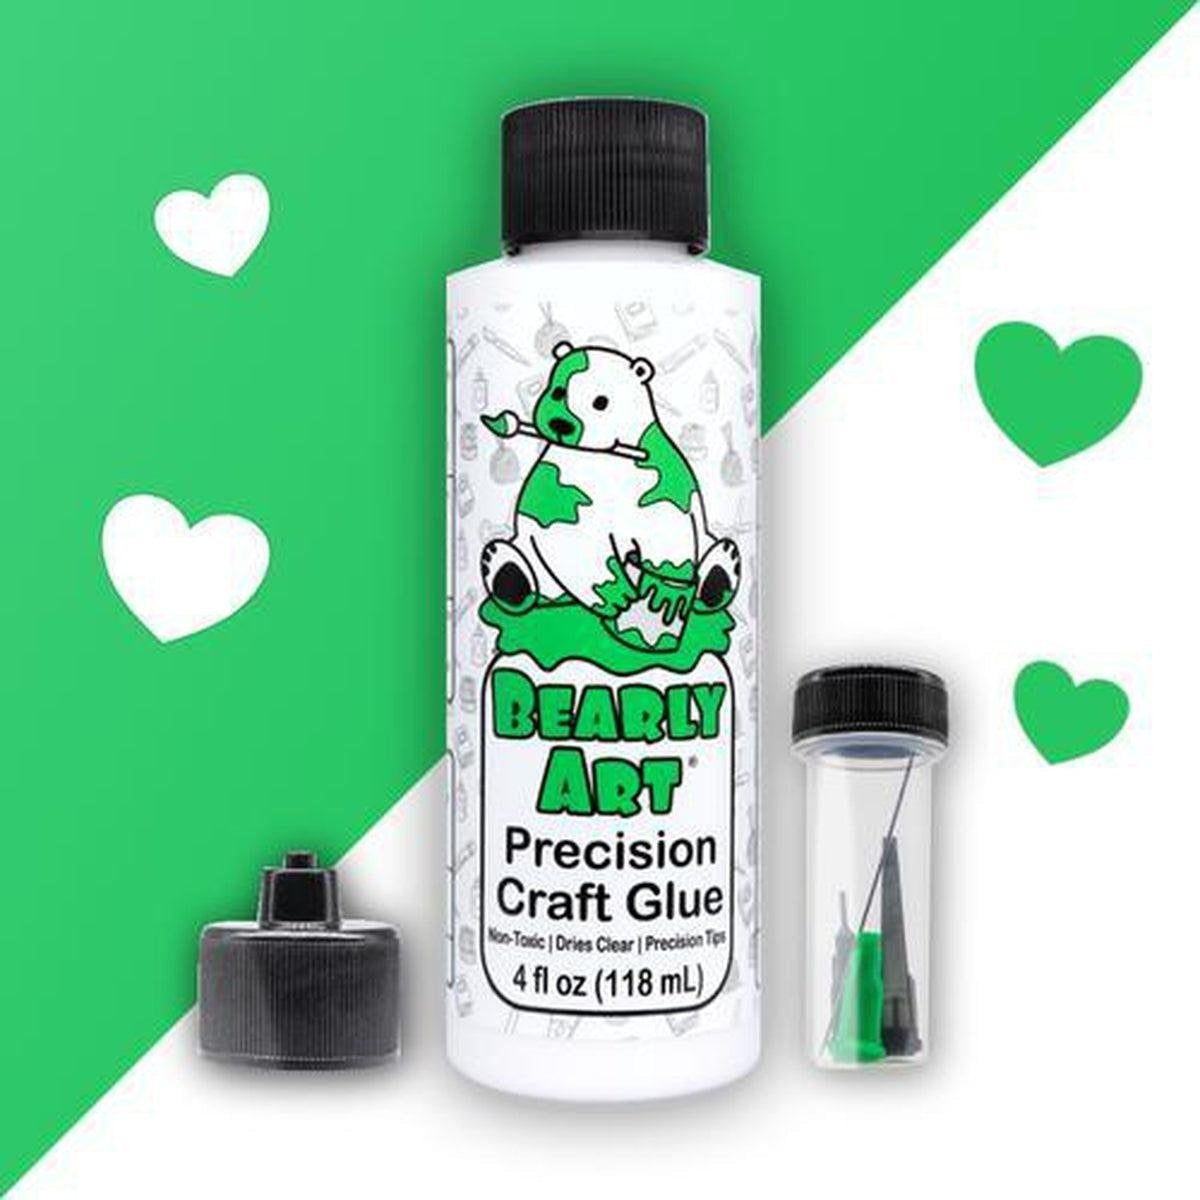 Bearly Art Precision Craft Glue & Refill Review 